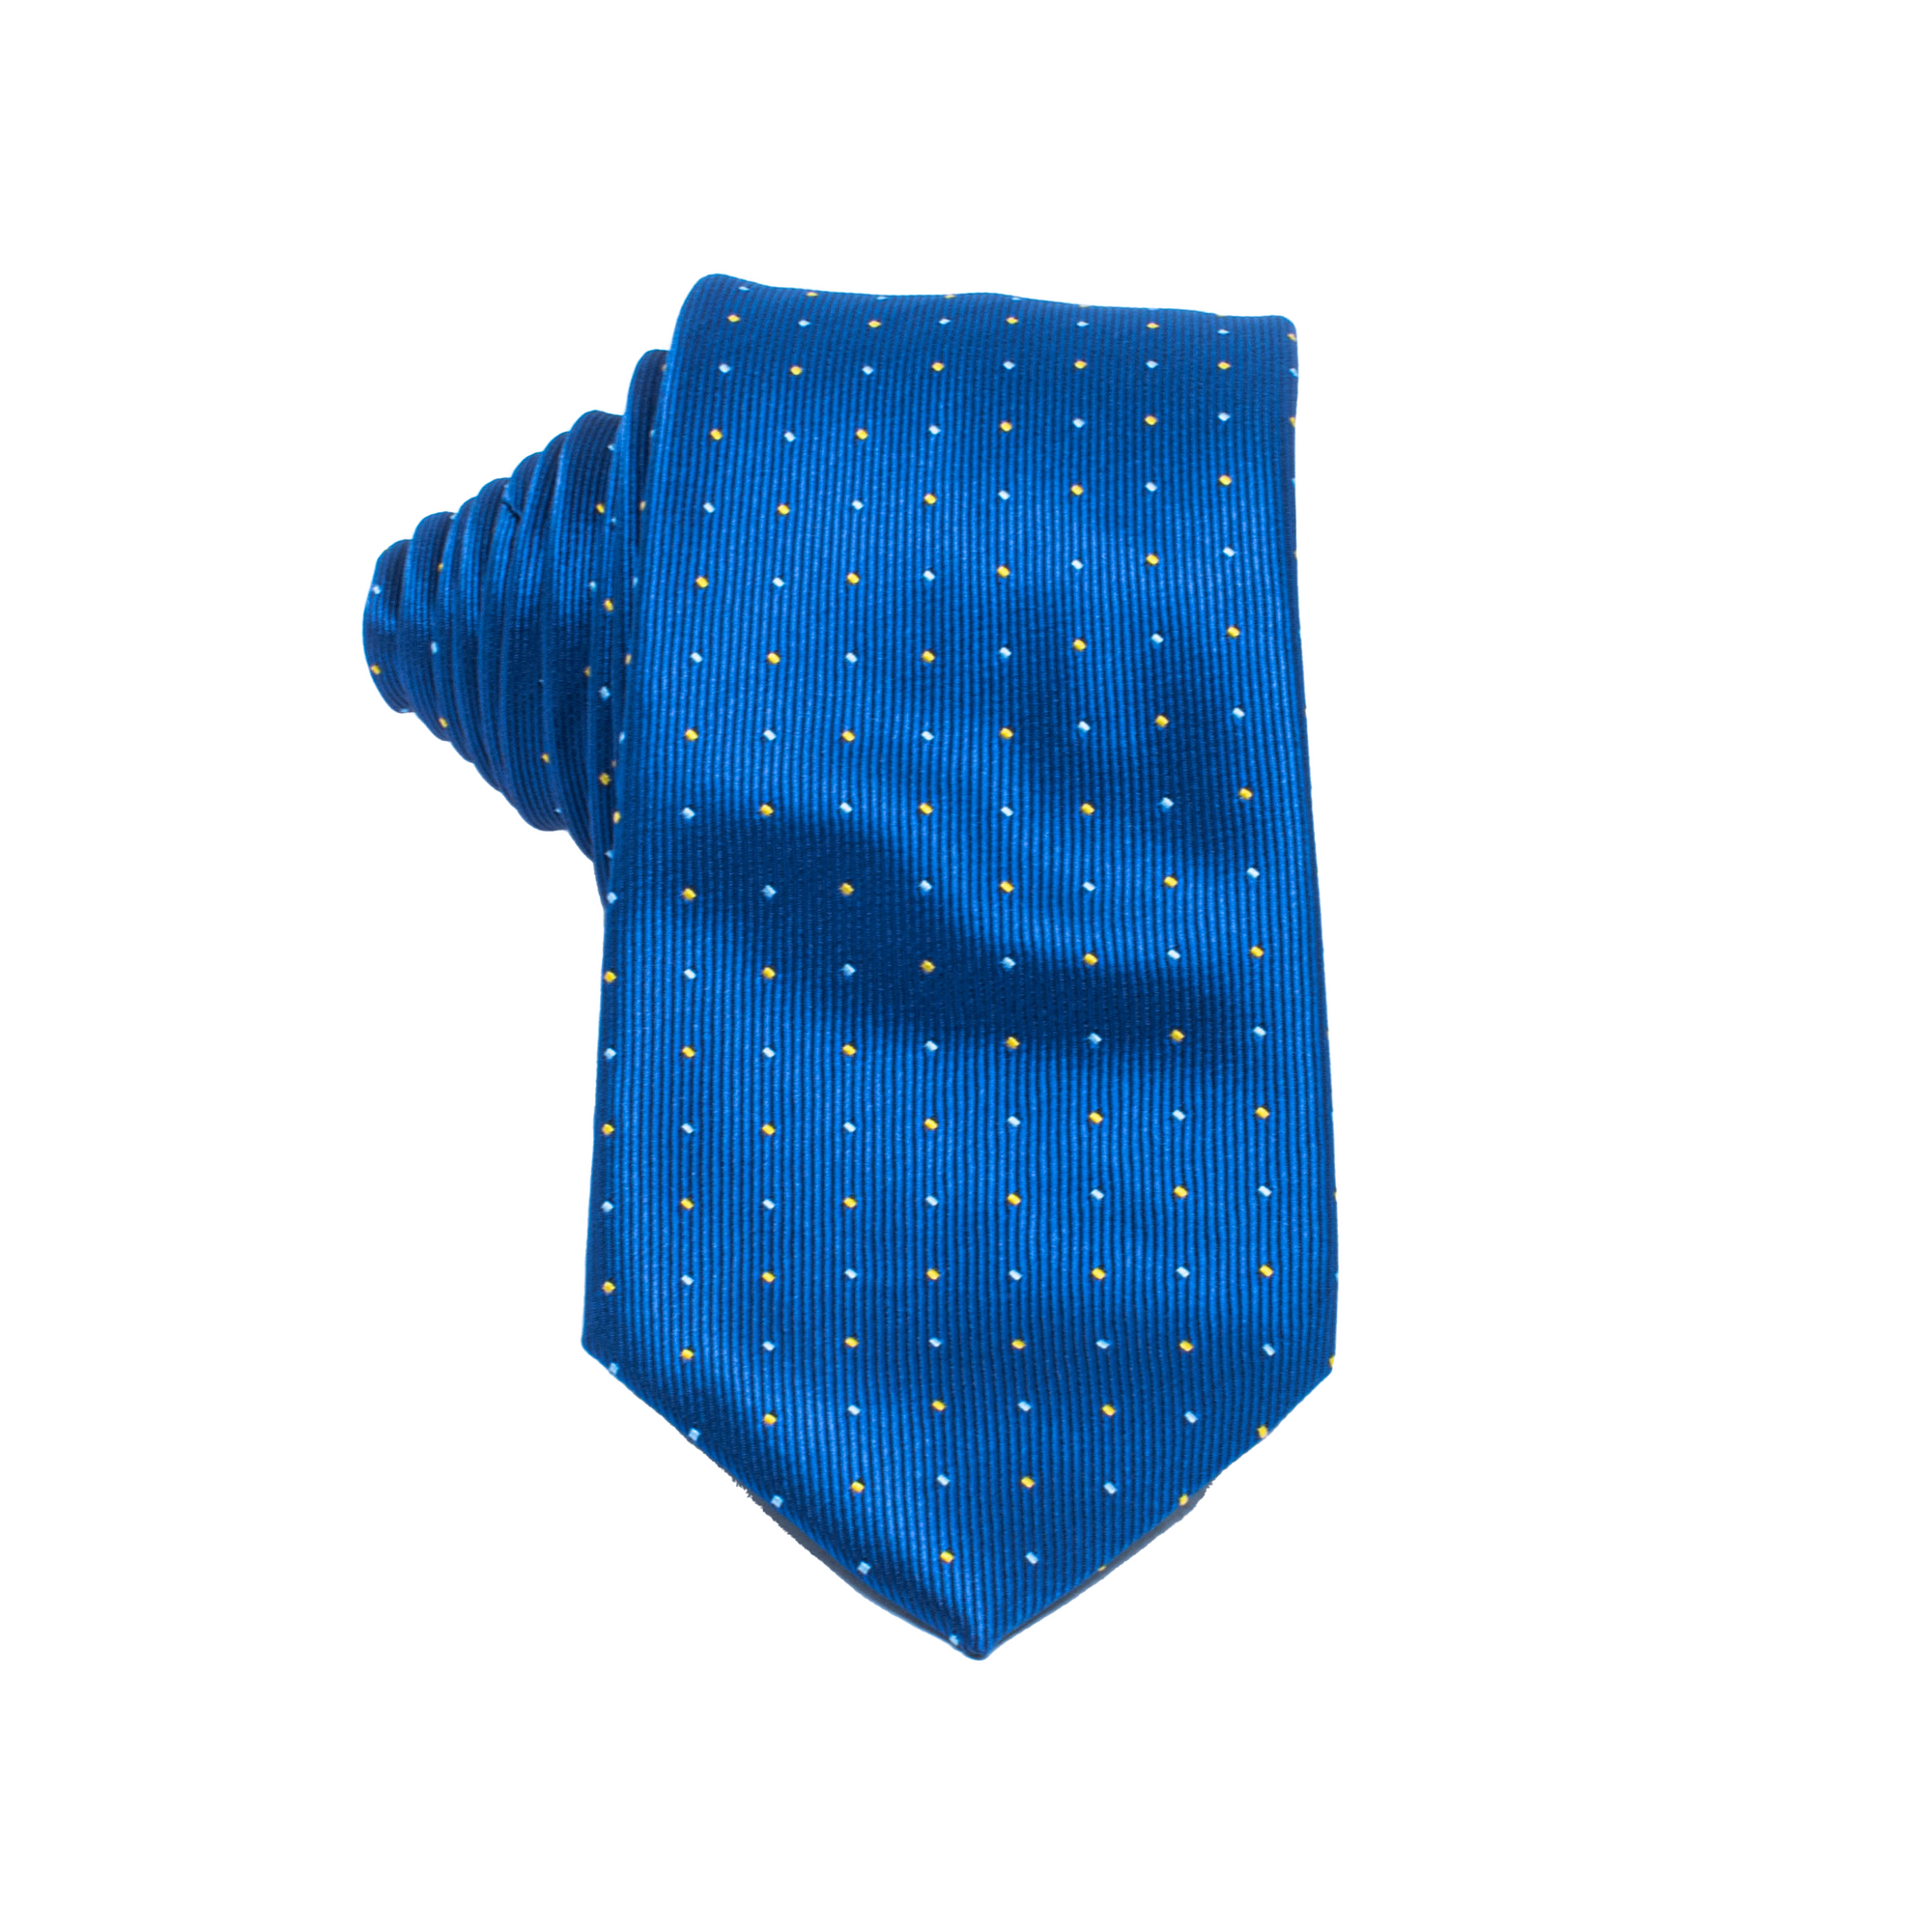 Mens Neck Tie - Navy Blue with Yellow Combo Pin Dots